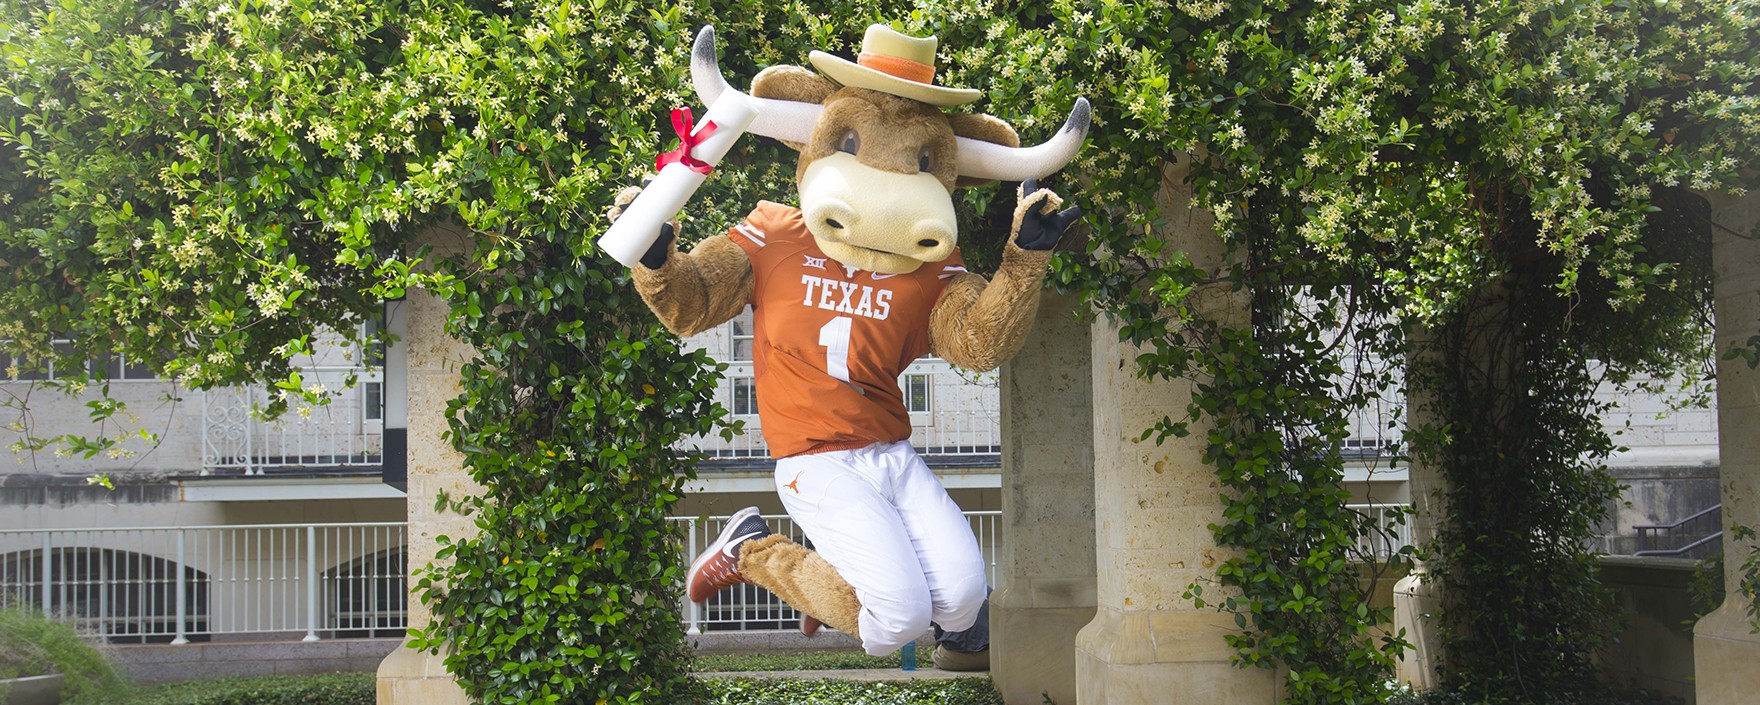 Bevo mascot jumping with diploma in hand